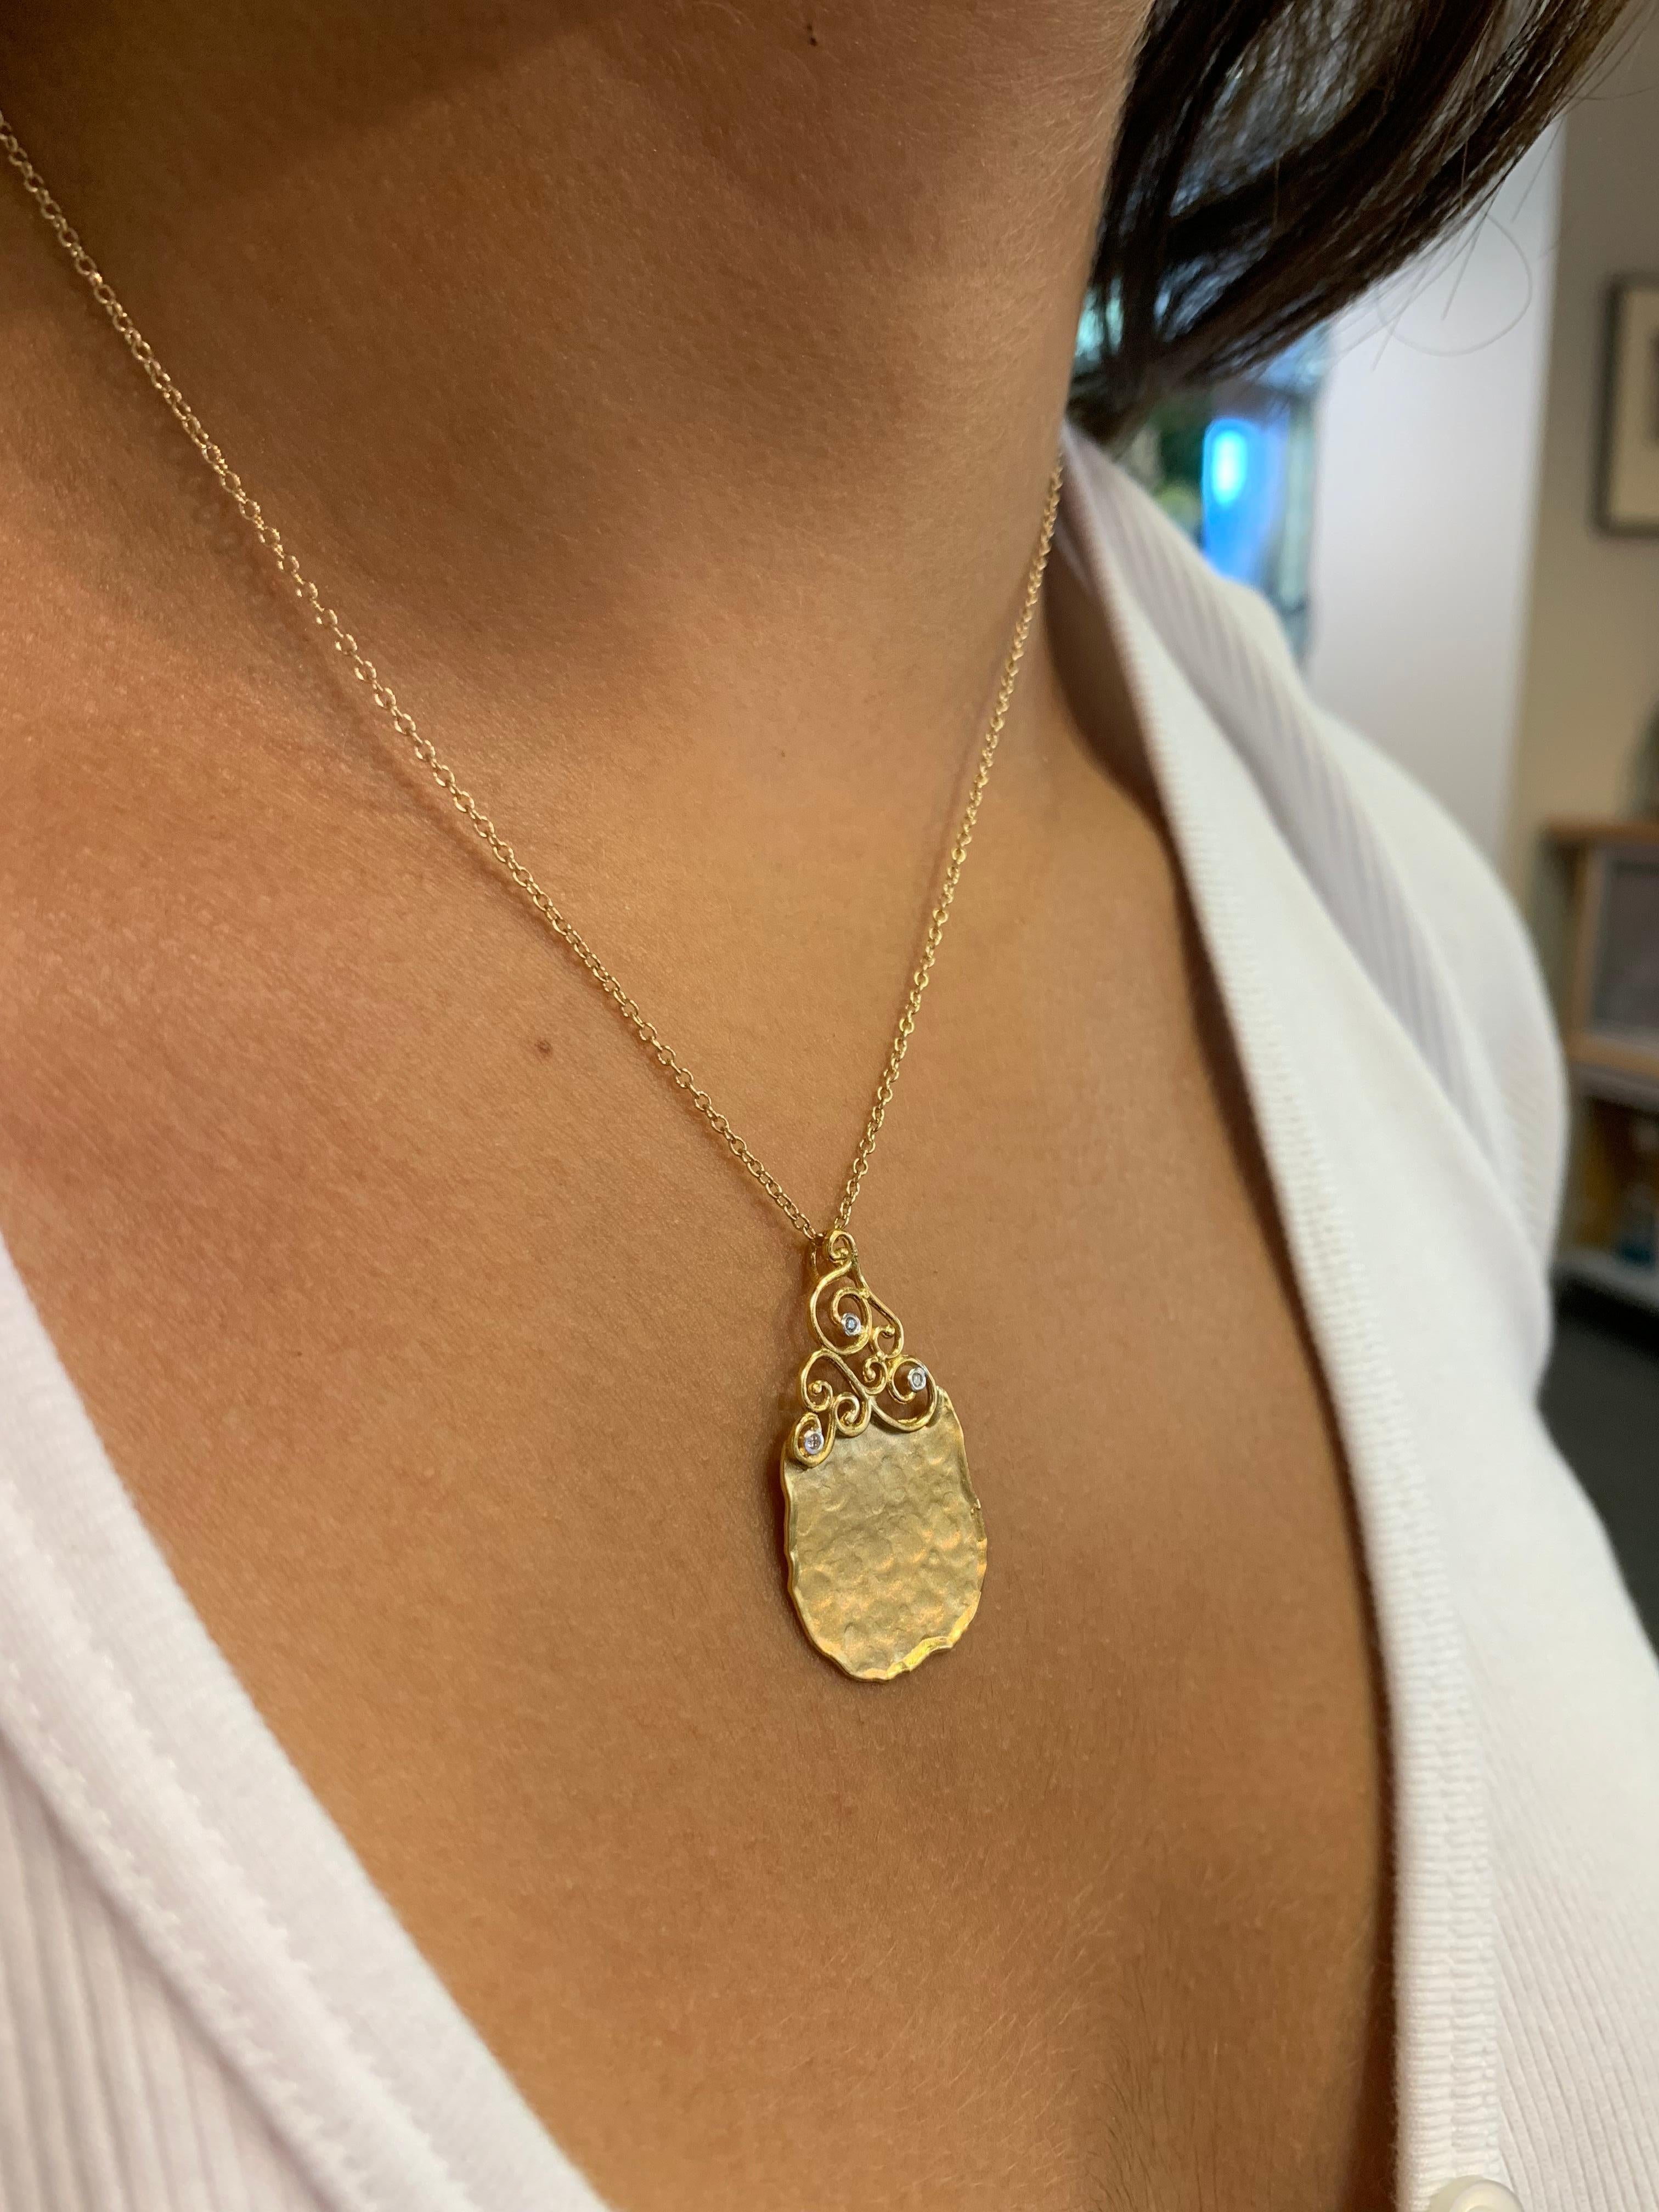 Handcrafted 14 Karat Yellow Gold Tear-Drop Filigree Pendant In New Condition For Sale In Great Neck, NY